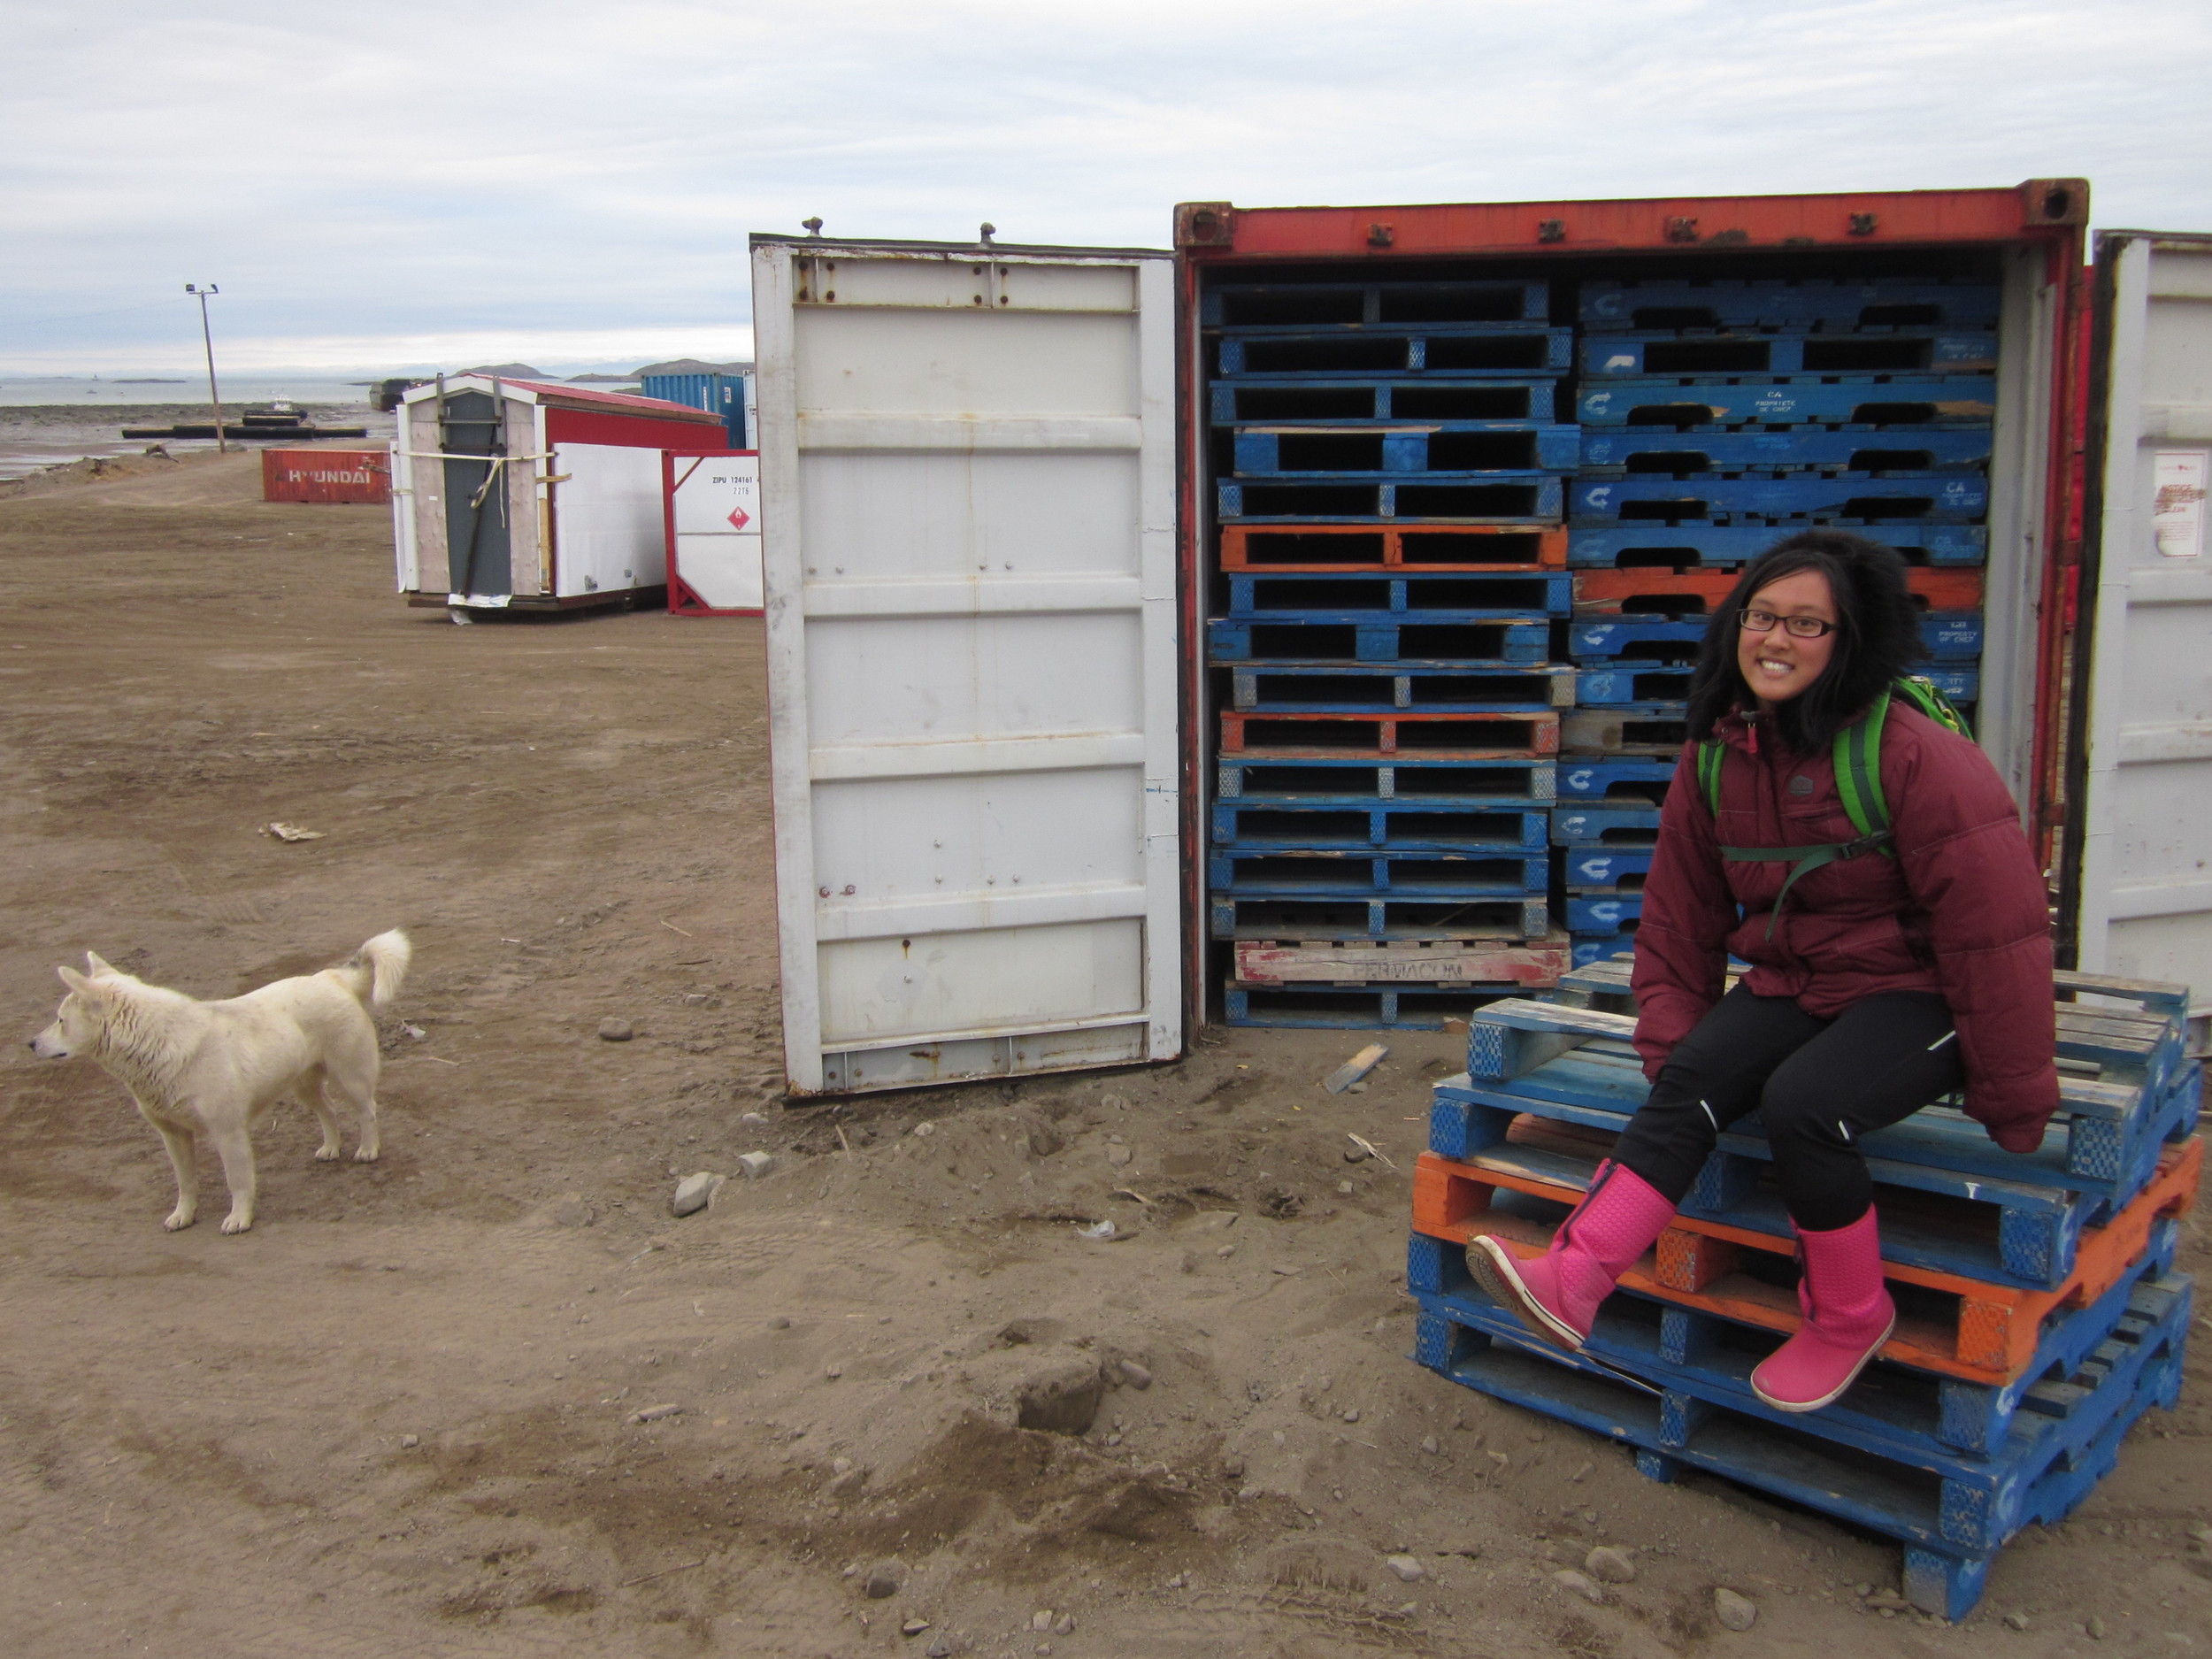 After spending most of her life in Vancouver, British Columbia, Sandi Chan plunders forward in her Katimavik-life-goal of living in all parts of Canada. Having arrived in Iqaluit, Nunavut in May 2013, she now only needs the Yukon and Newfoundland to complete the map. Spare a couch anyone?